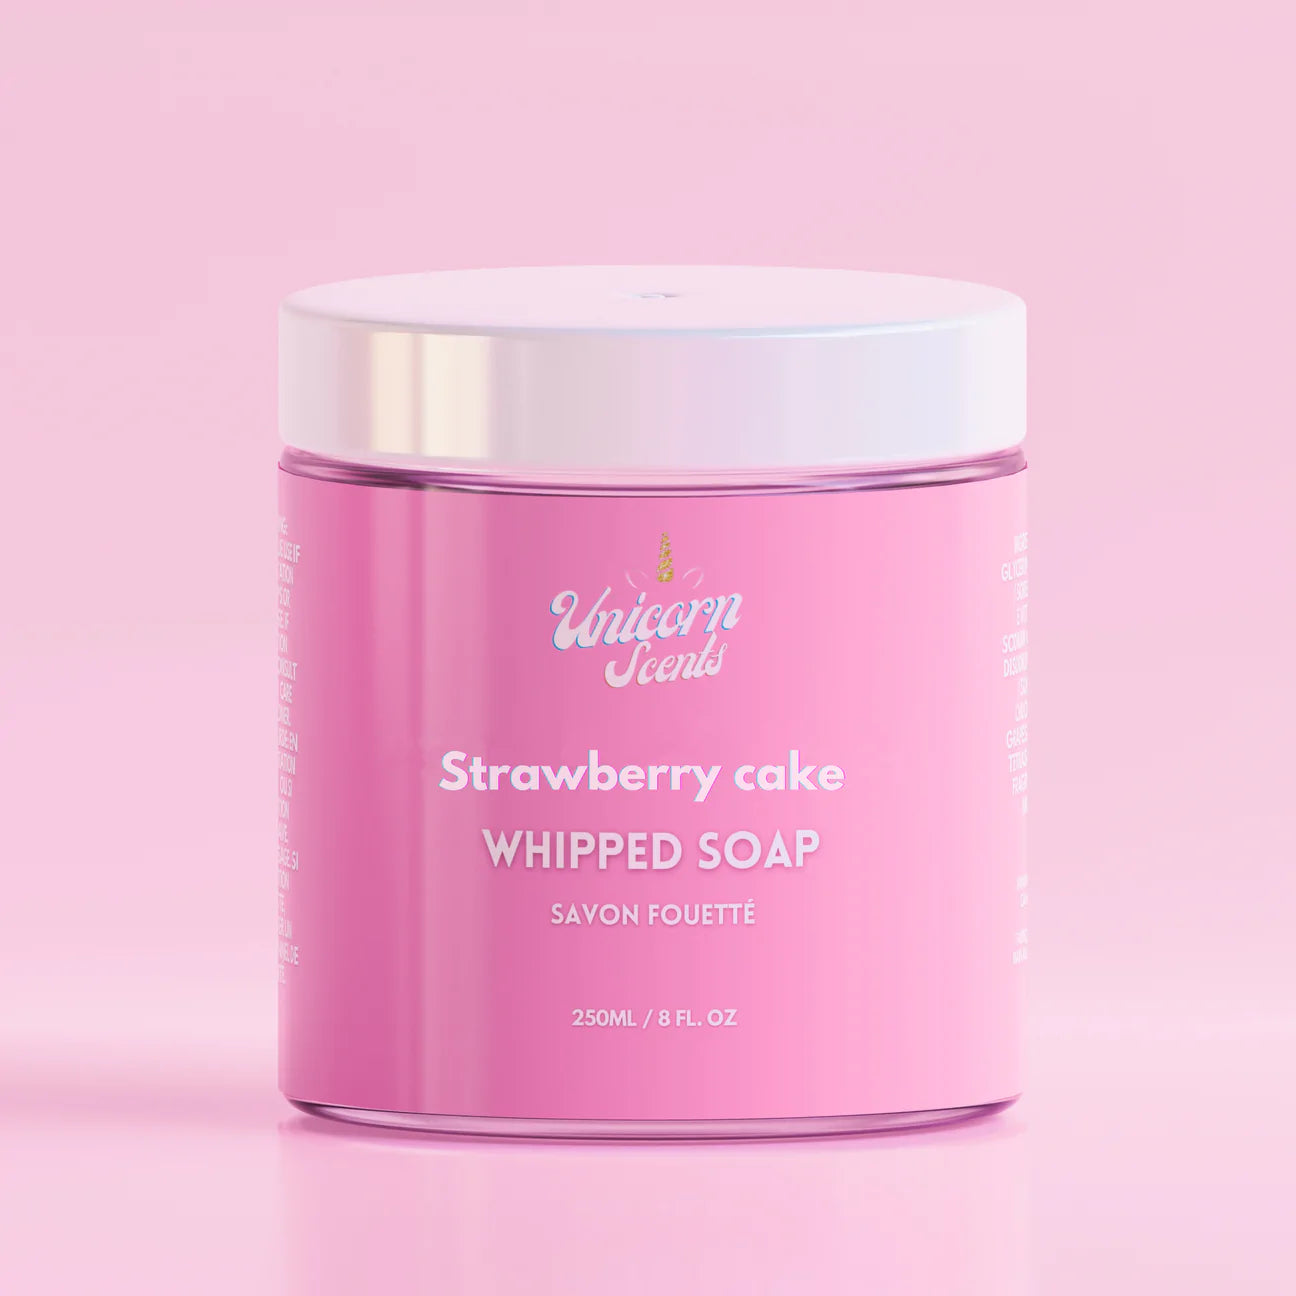 Whipped soap - Strawberry cake